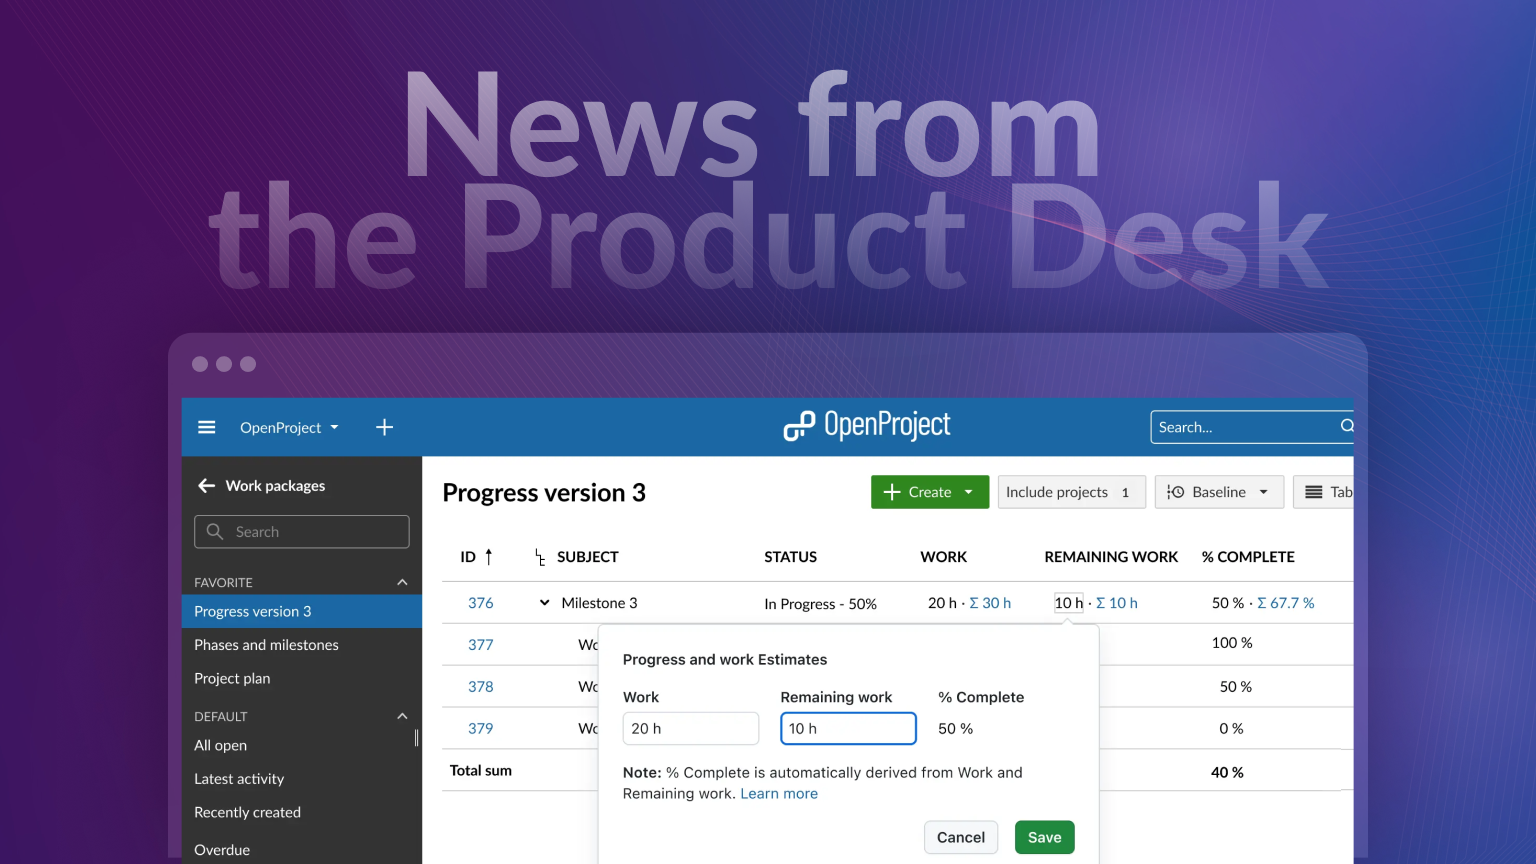 News from the Product Desk: Significant changes to progress and work estimates